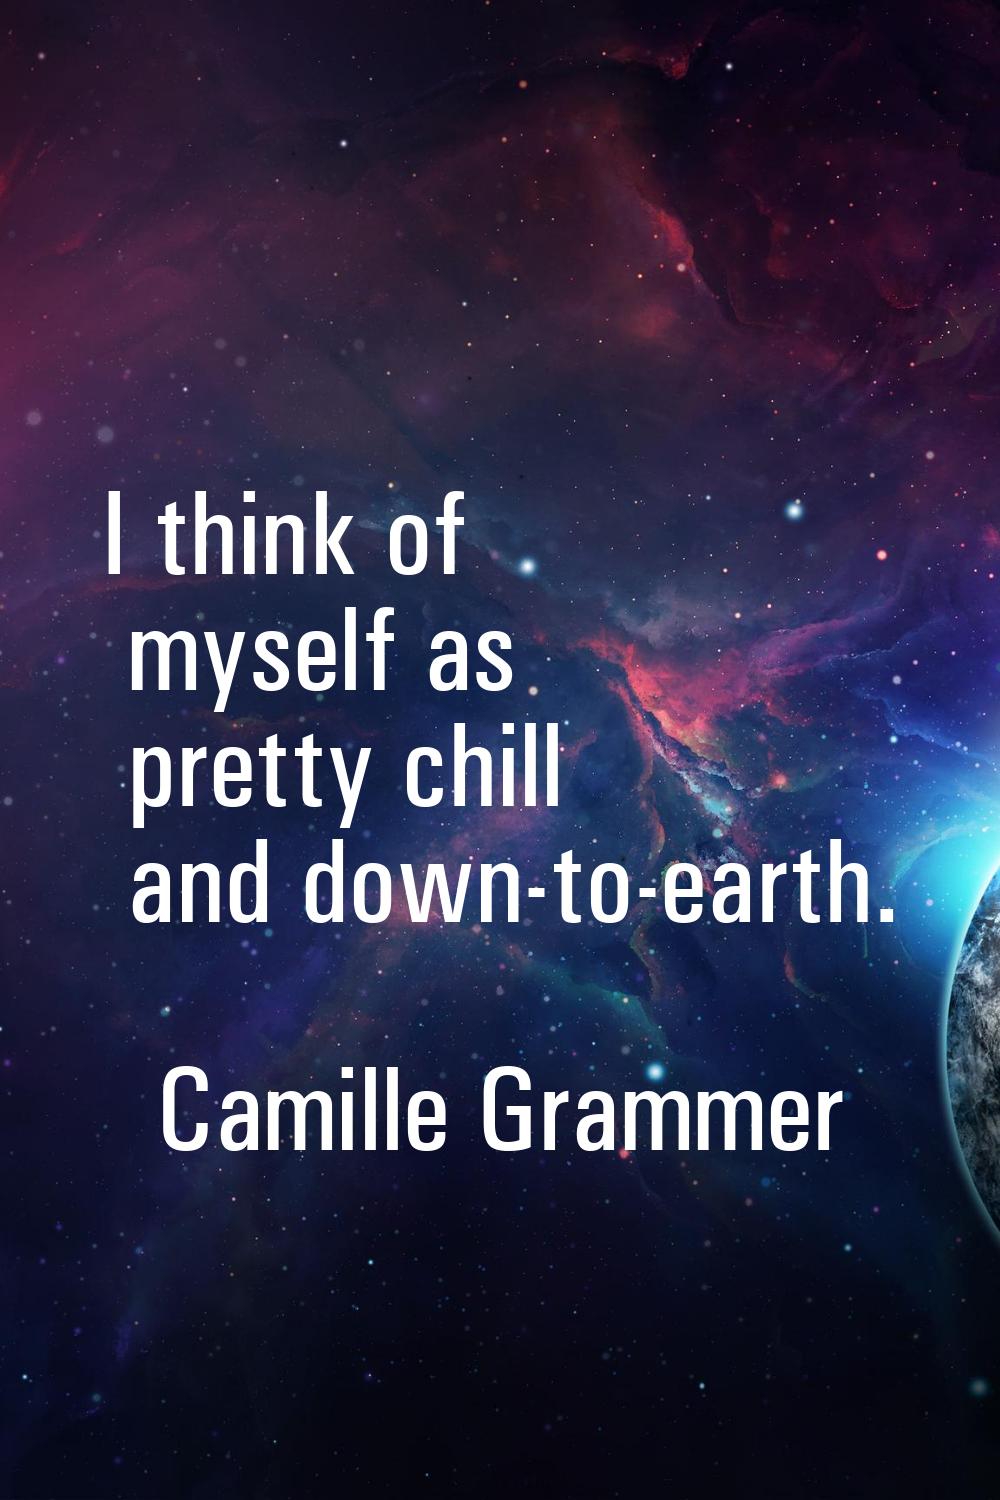 I think of myself as pretty chill and down-to-earth.